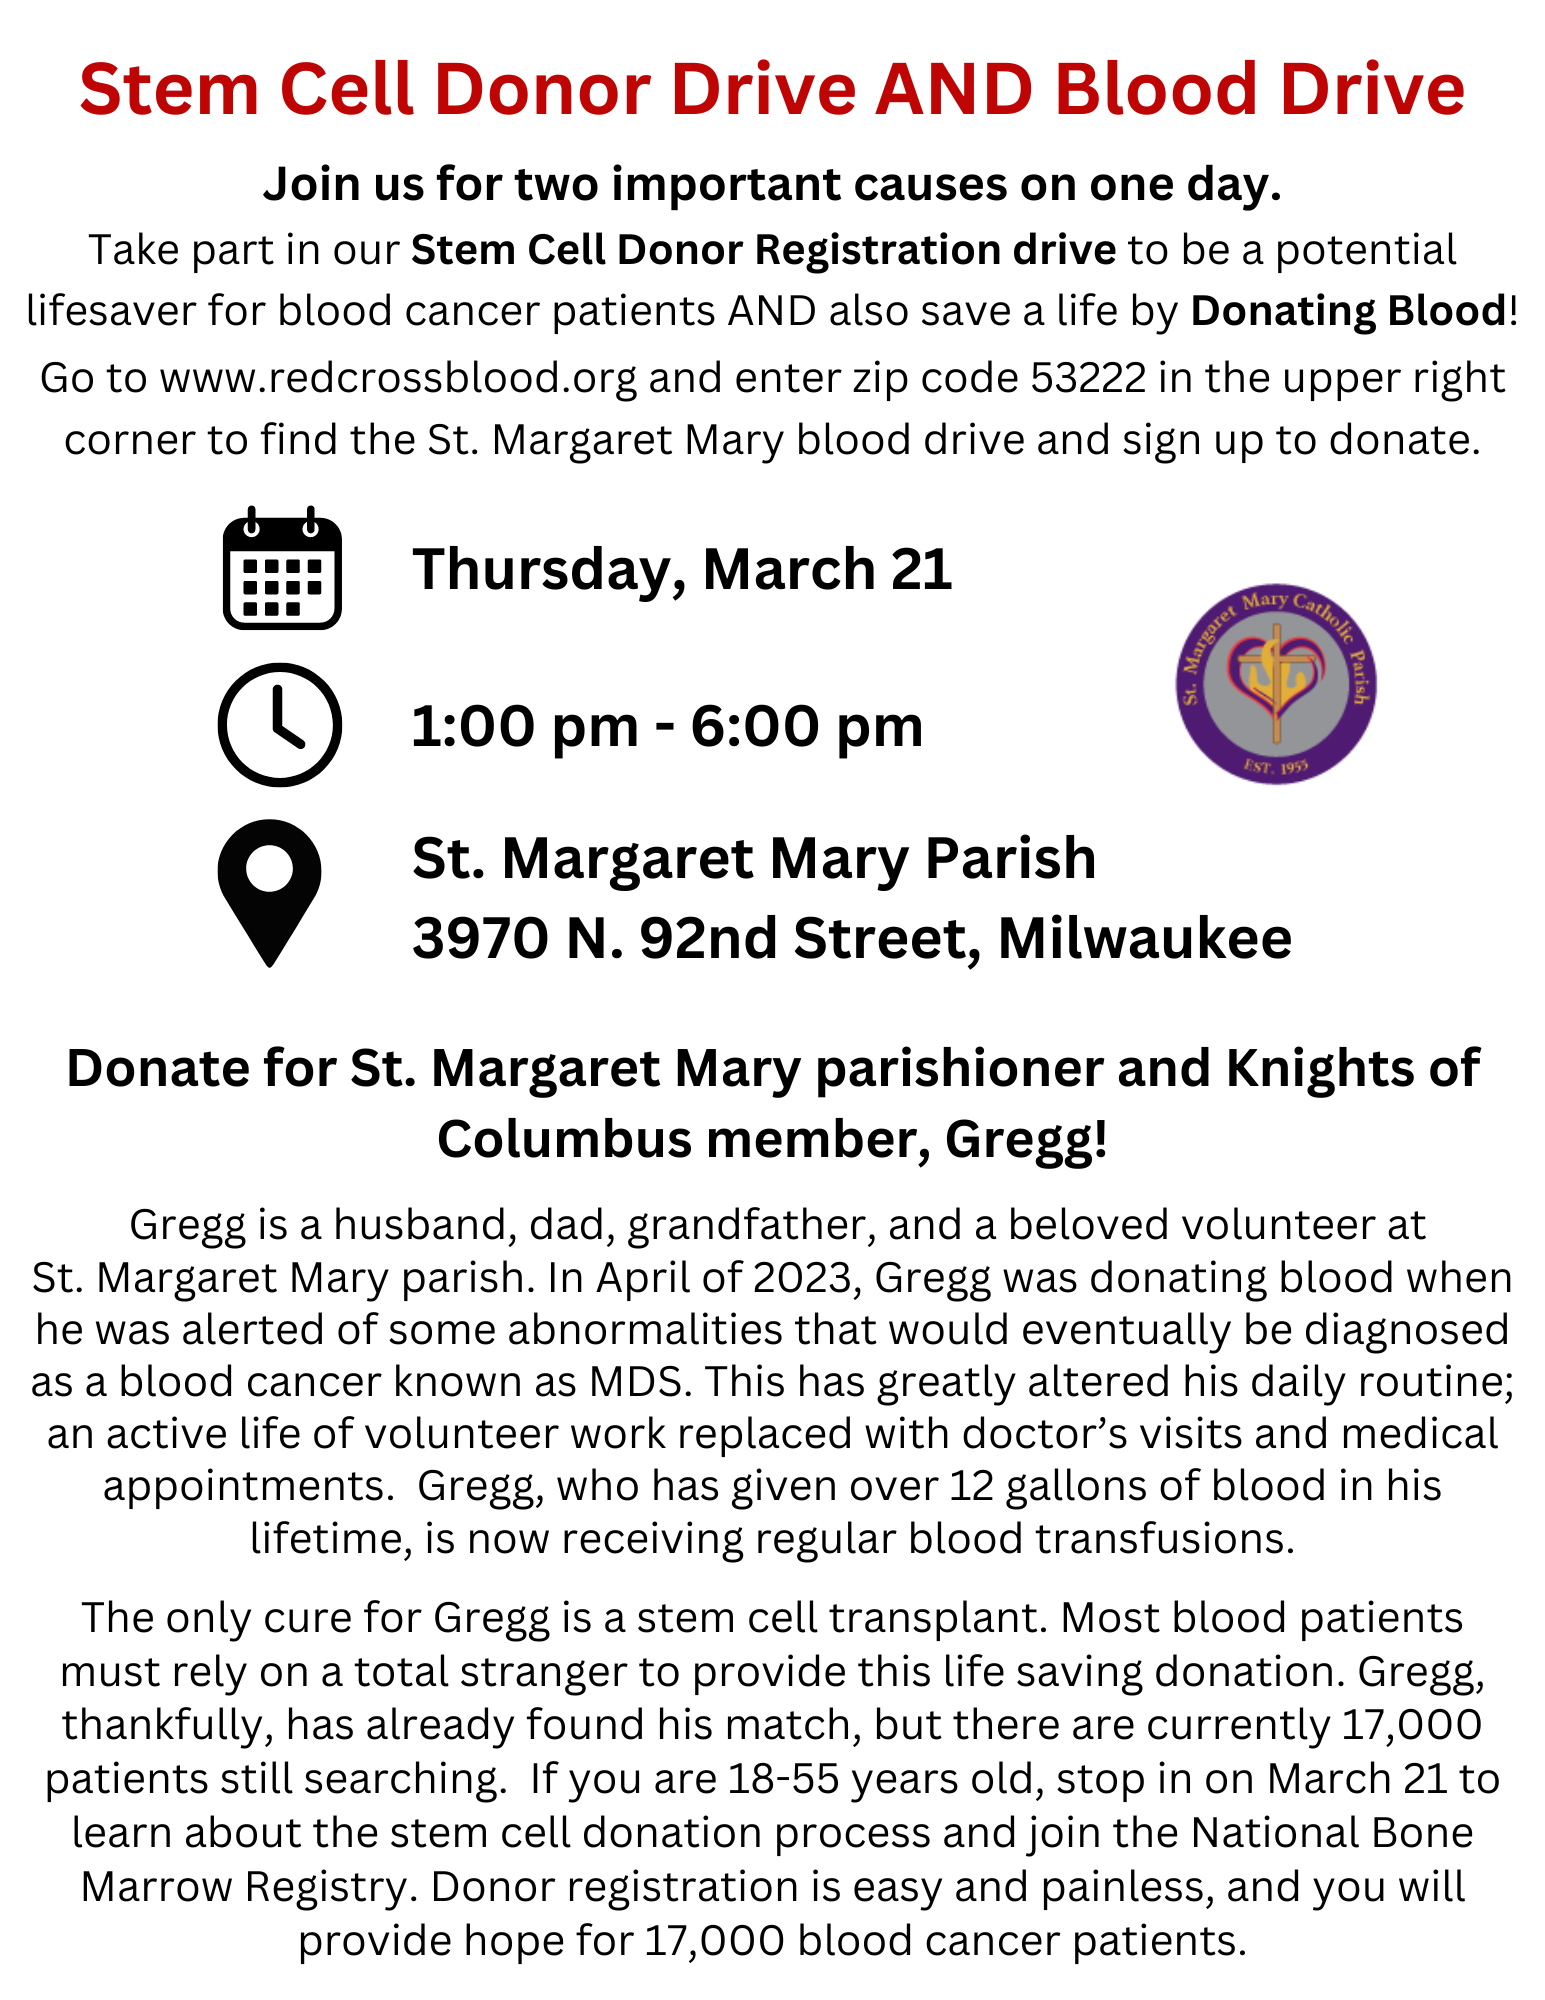 Stem Cell Donor Registration and Blood Drive Flyer